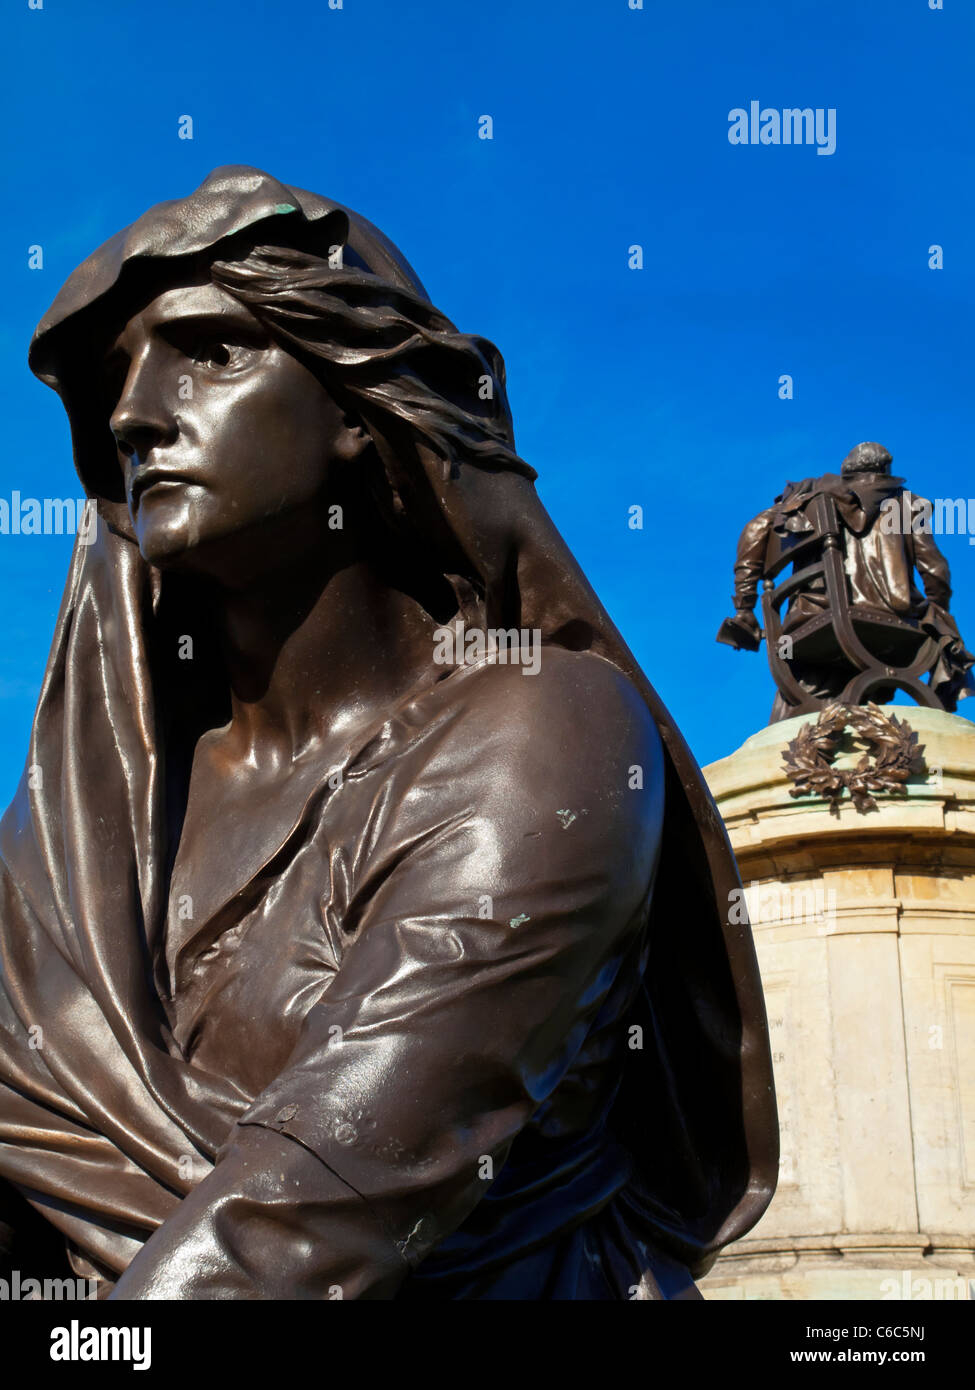 Lady Macbeth on the statue to William Shakespeare in Stratford-upon-Avon Warwickshire  UK designed by Lord Ronald Gower in 1888 Stock Photo